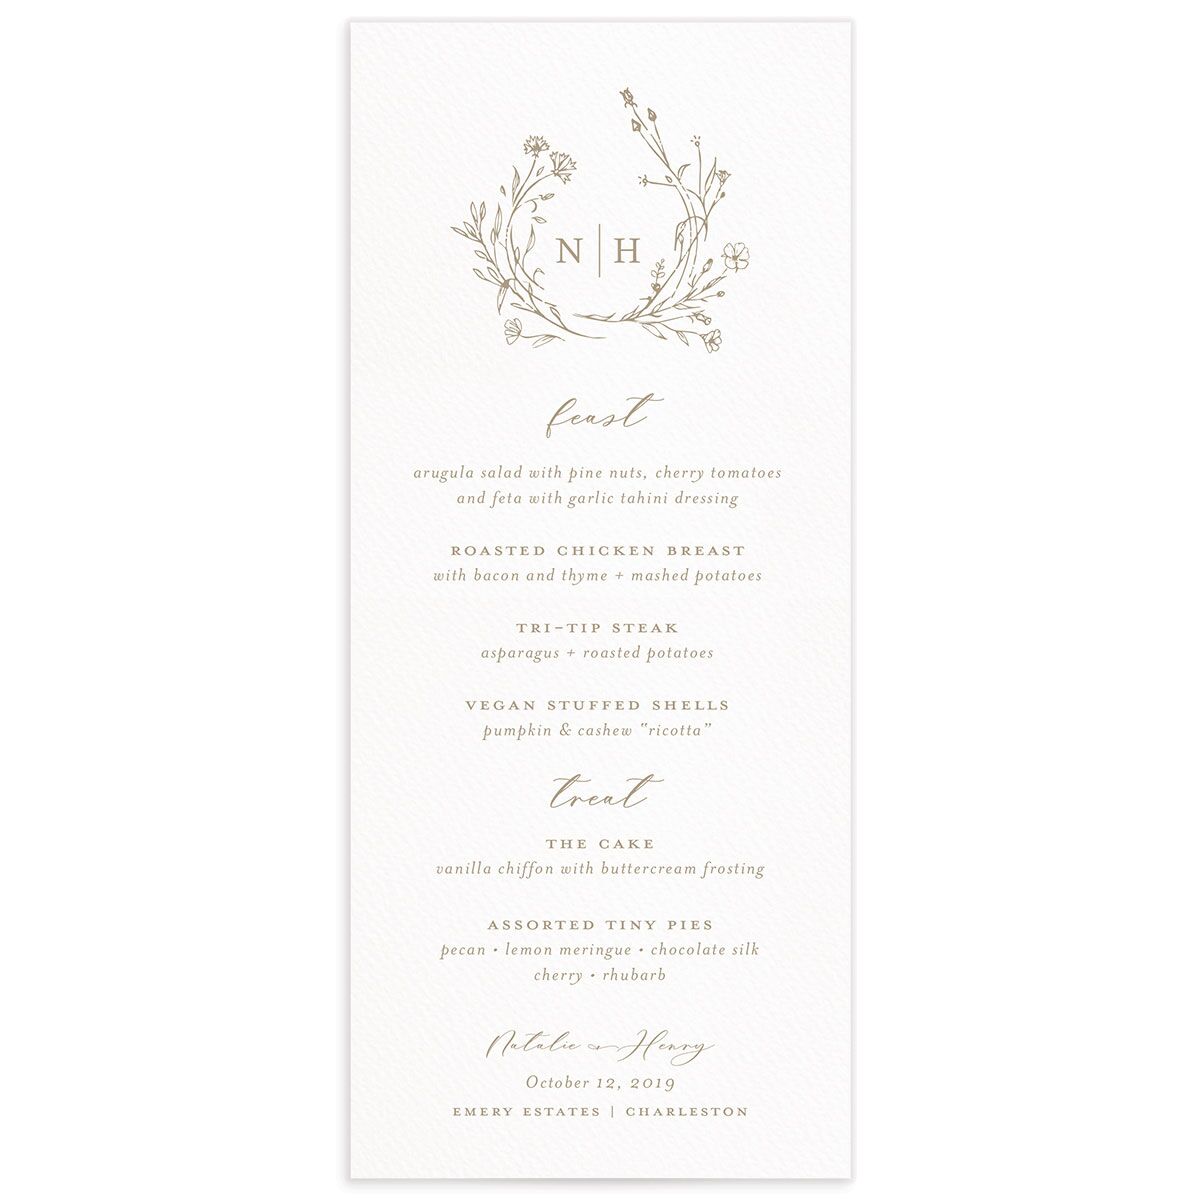 Illustrated Floral Menus front in Walnut